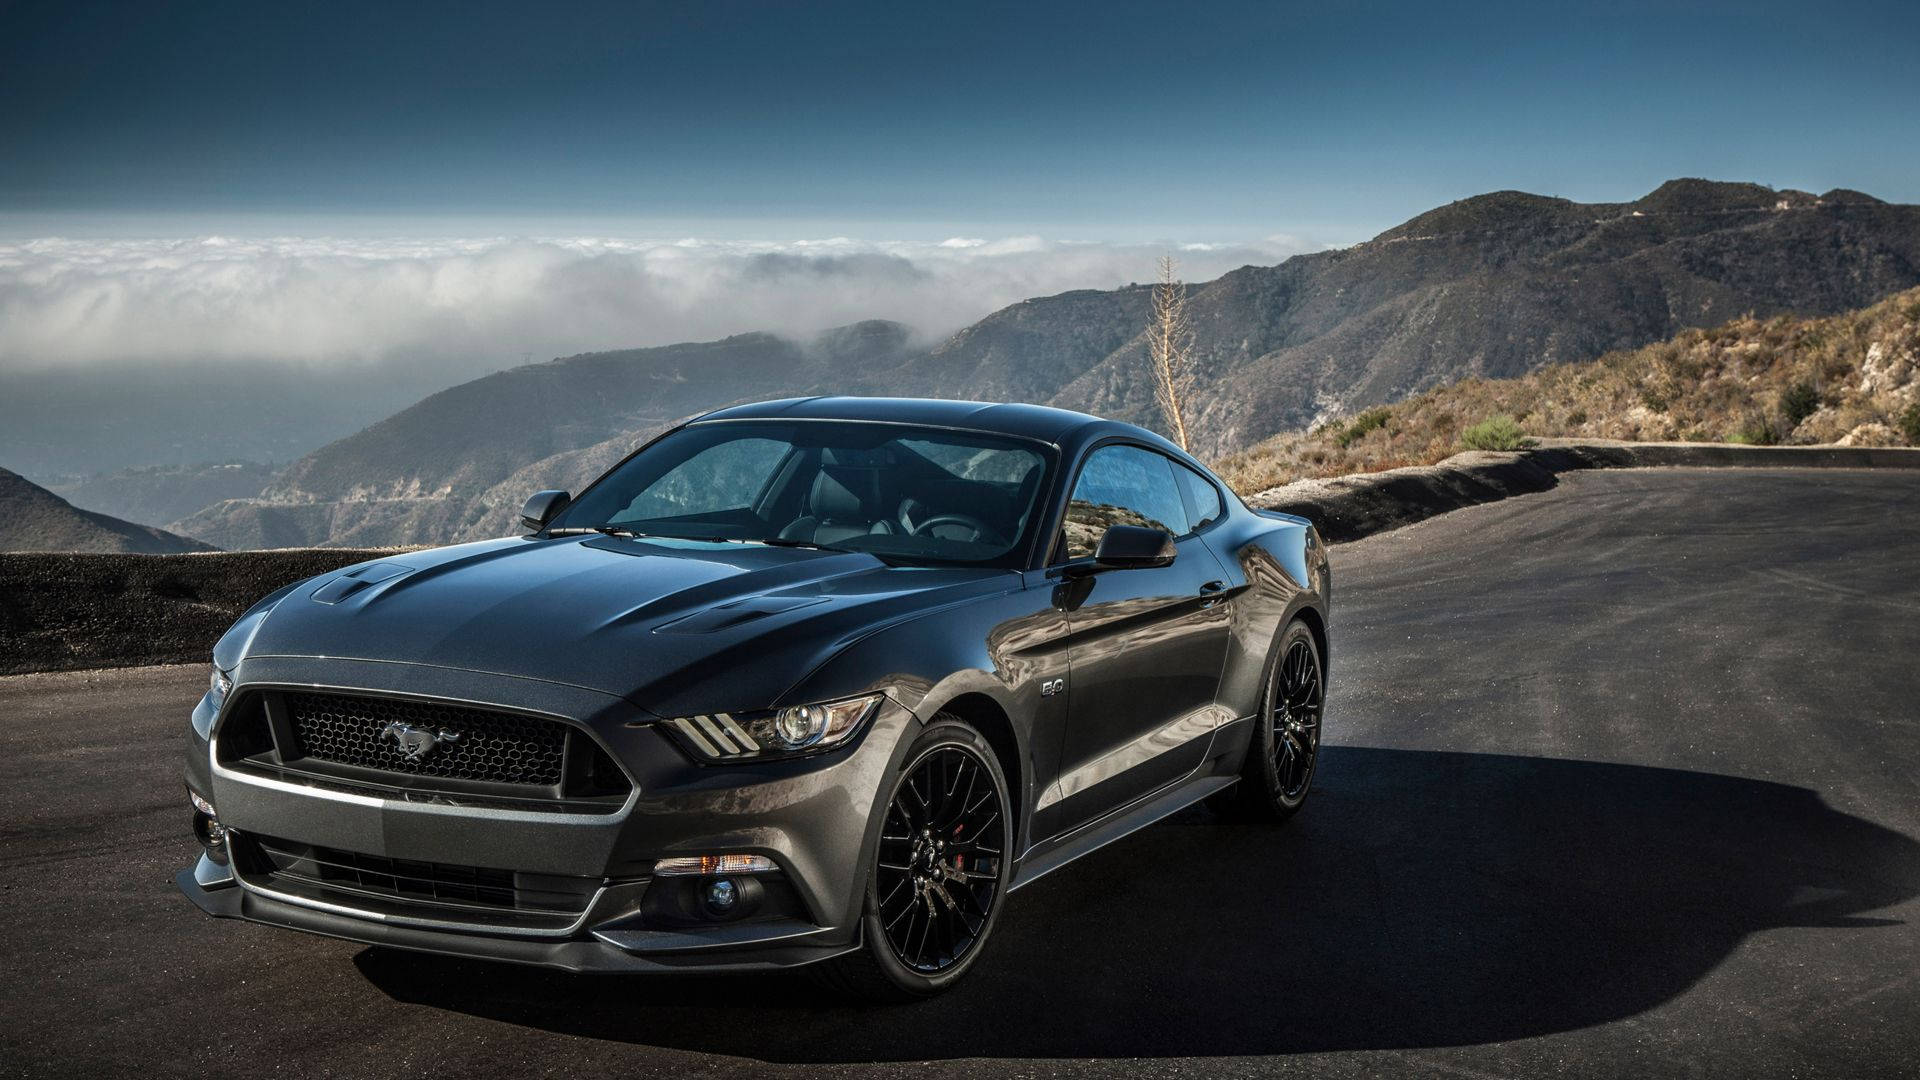 Grey Ford Mustang Gt 2015 Background